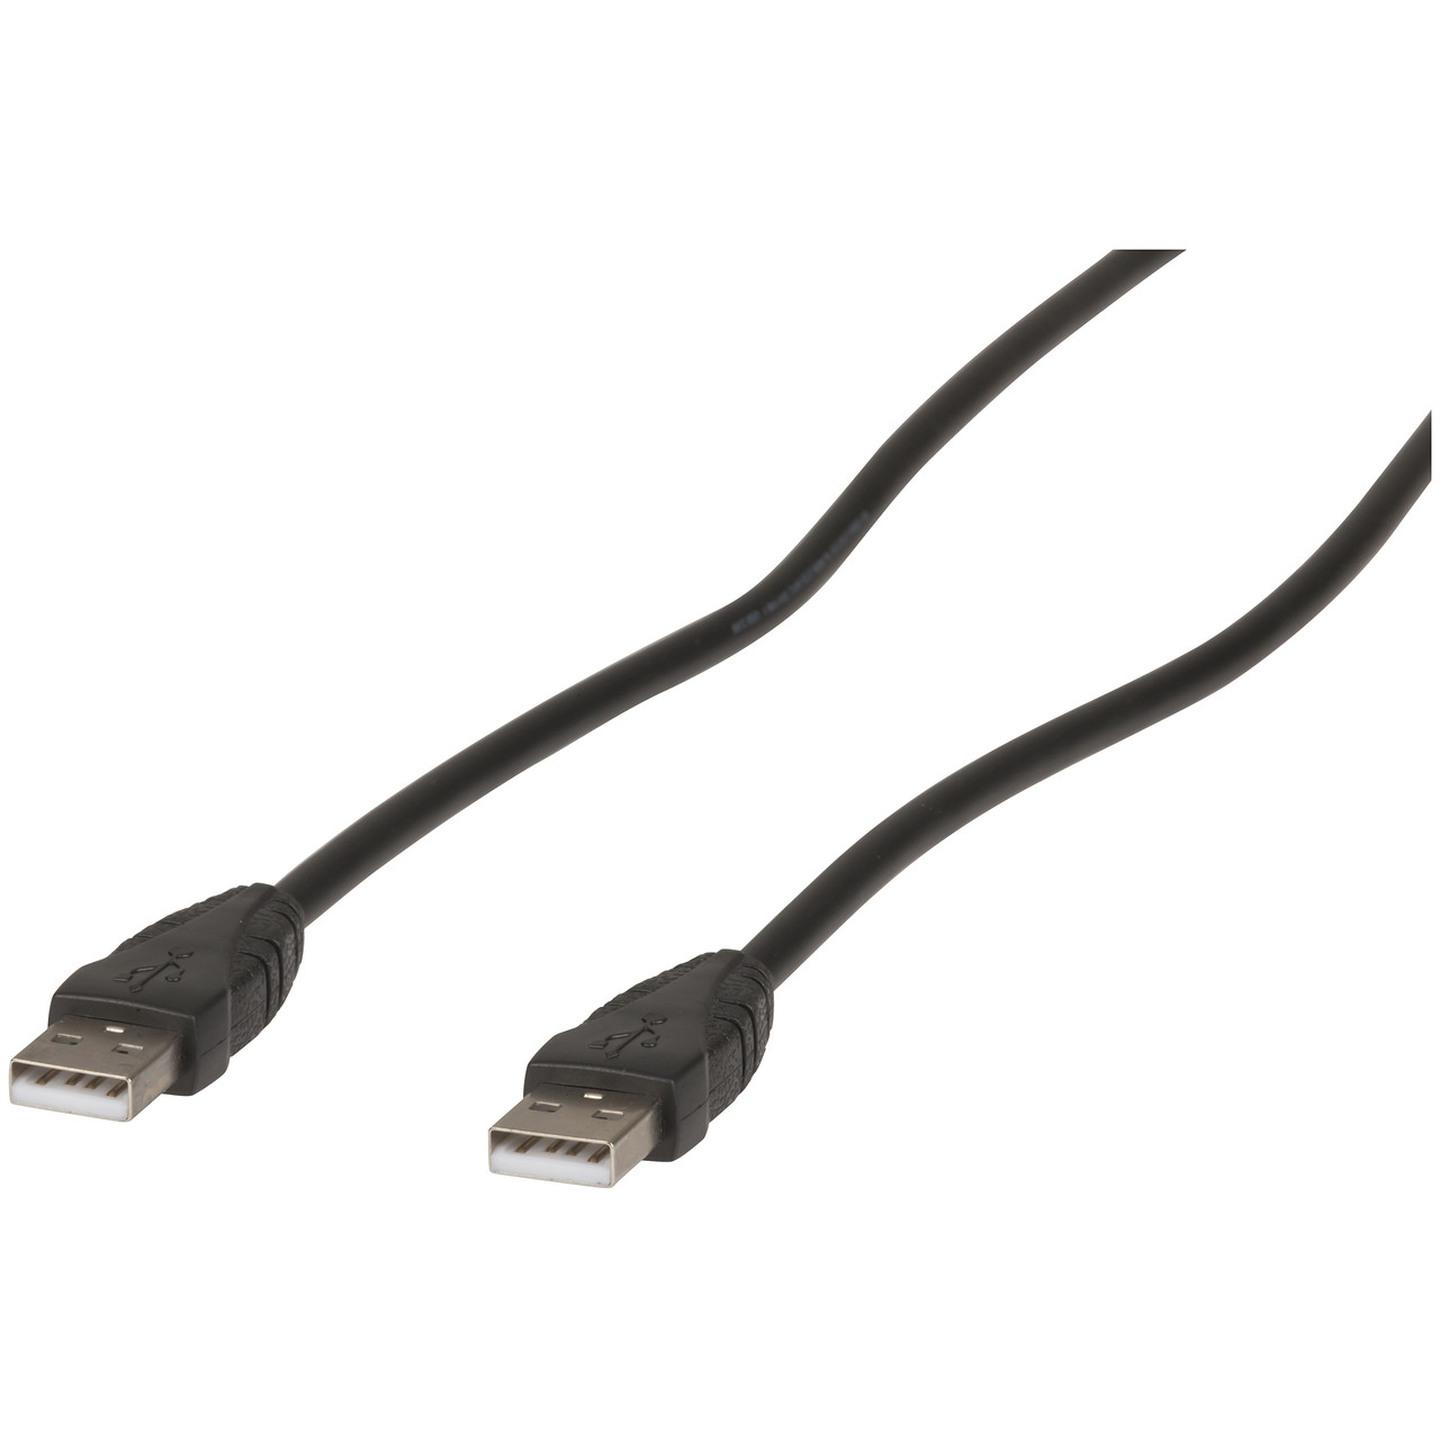 0.5m USB 2.0 A Male to A Male Cable 5 Pack